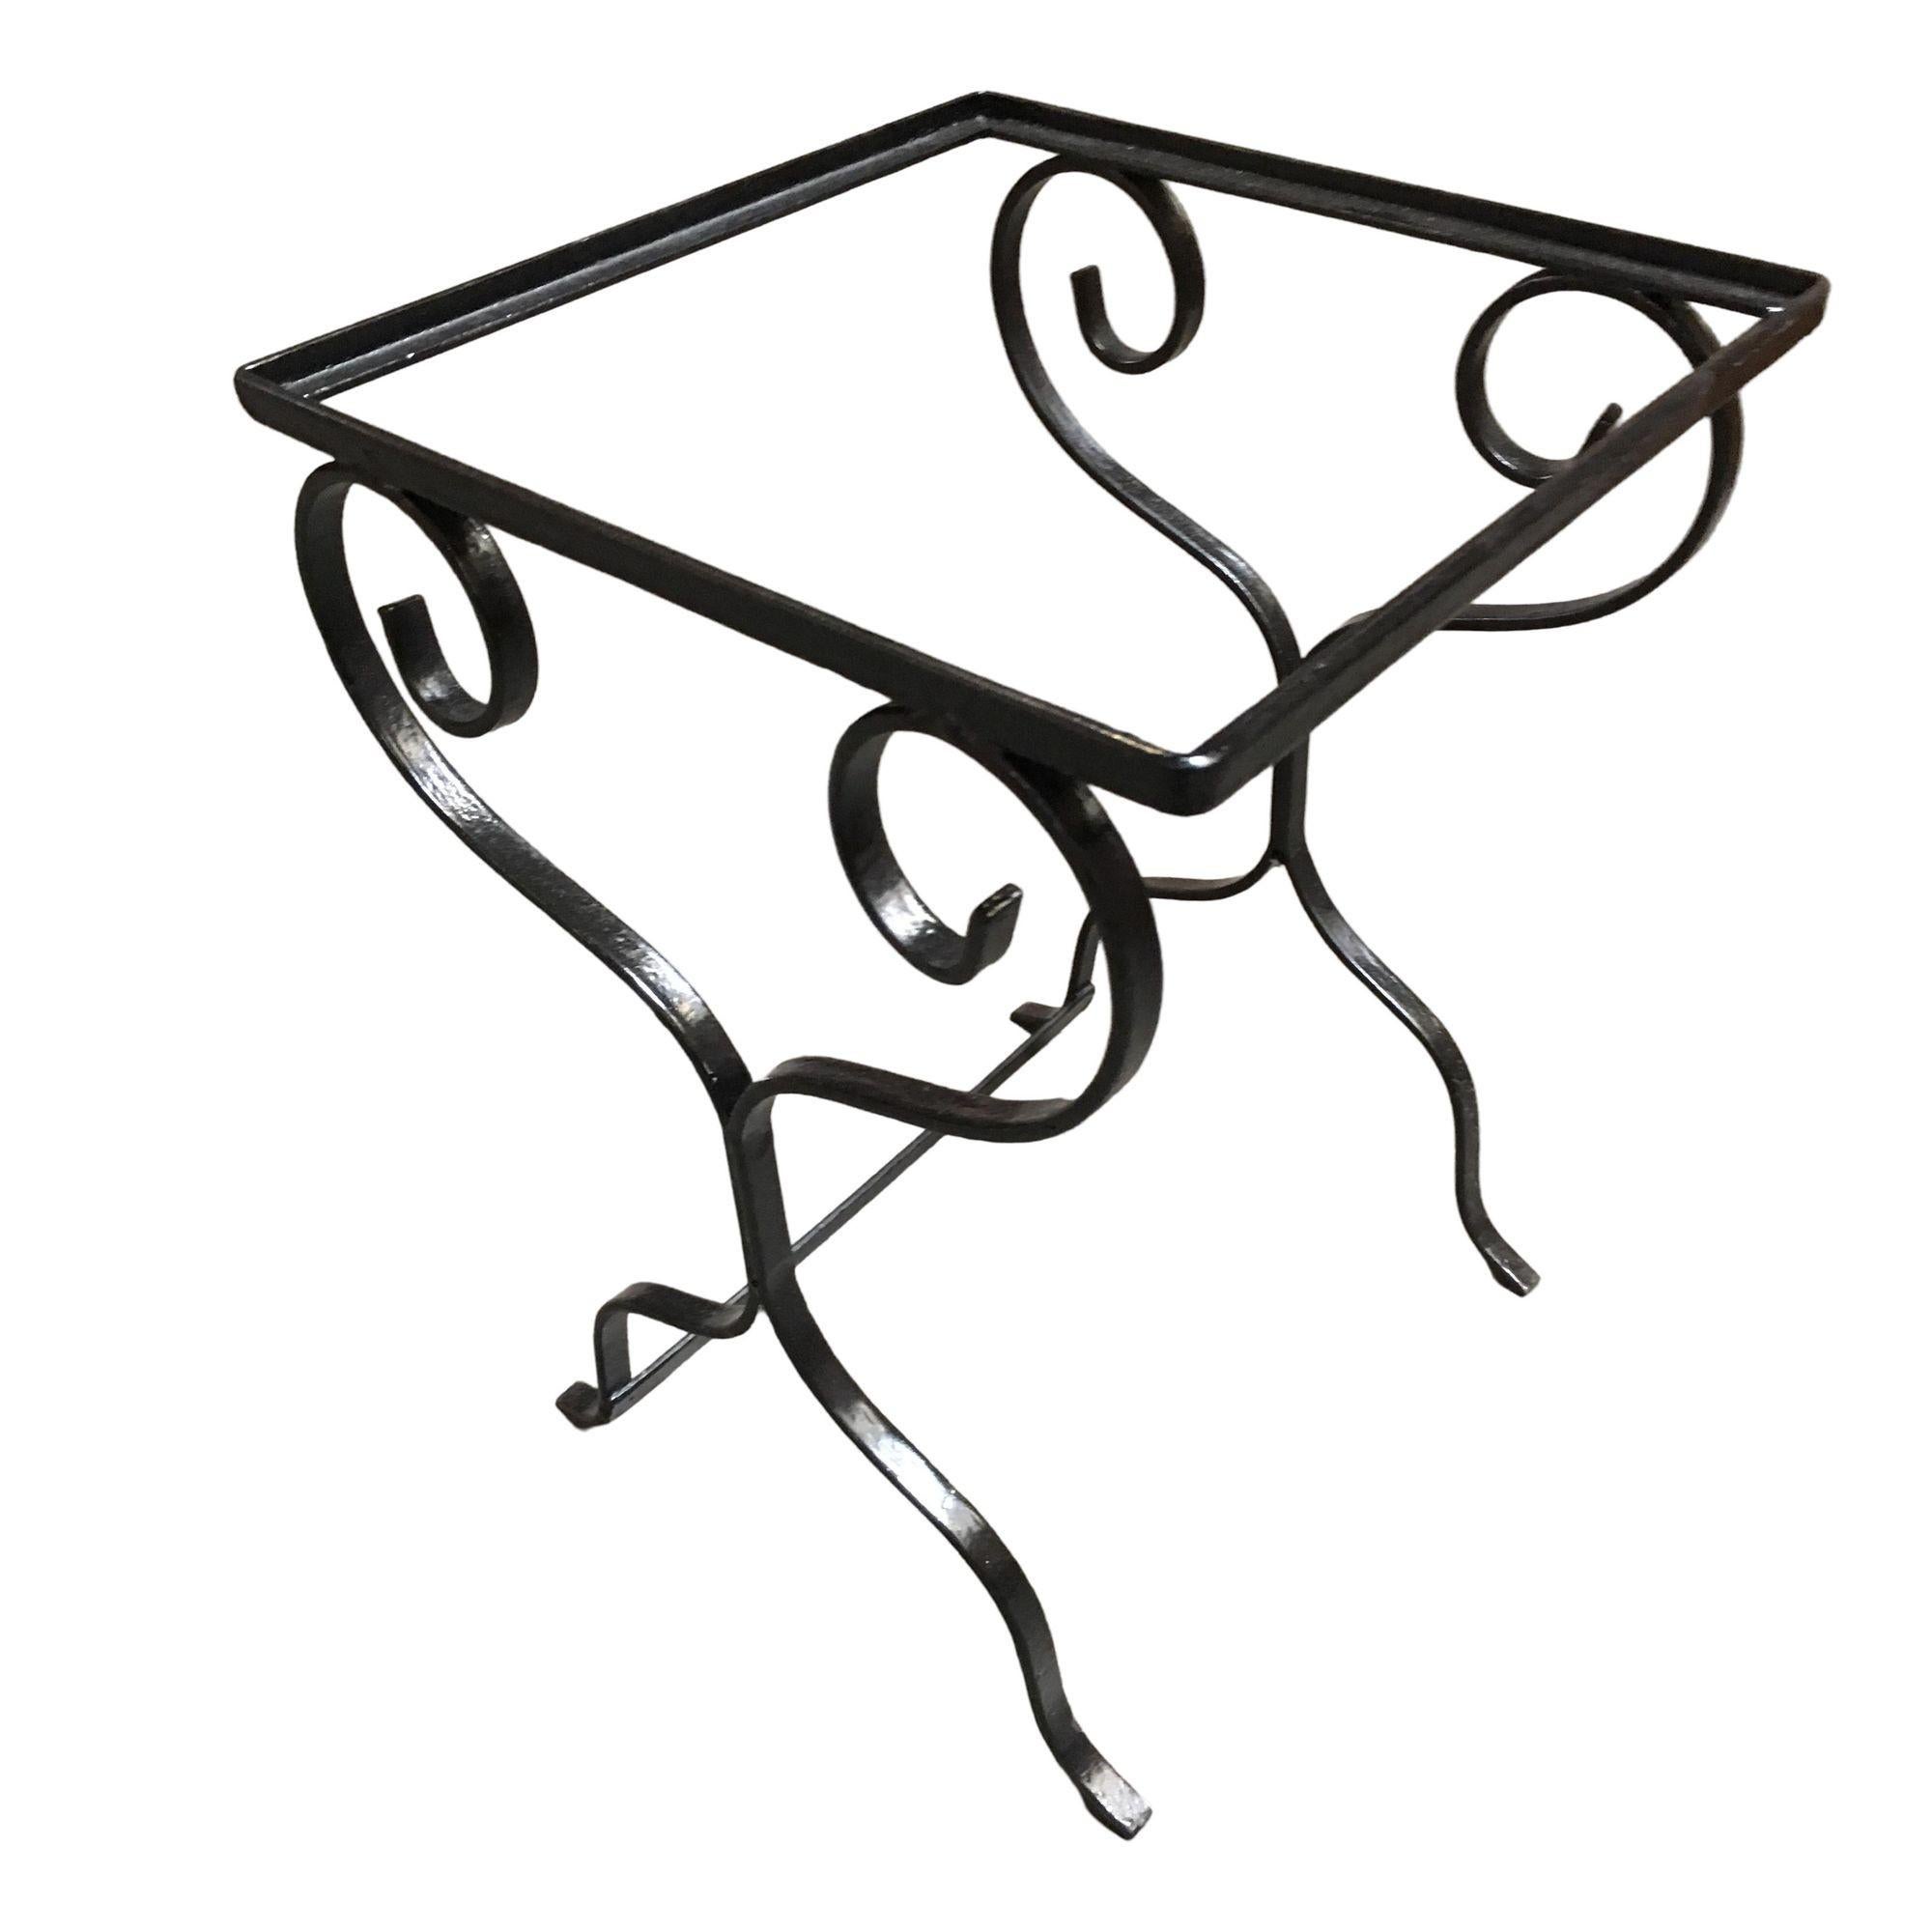 Mid-20th Century Midcentury Scrolling Iron Patio Nesting Side Tables with Glass Tops, Pair For Sale